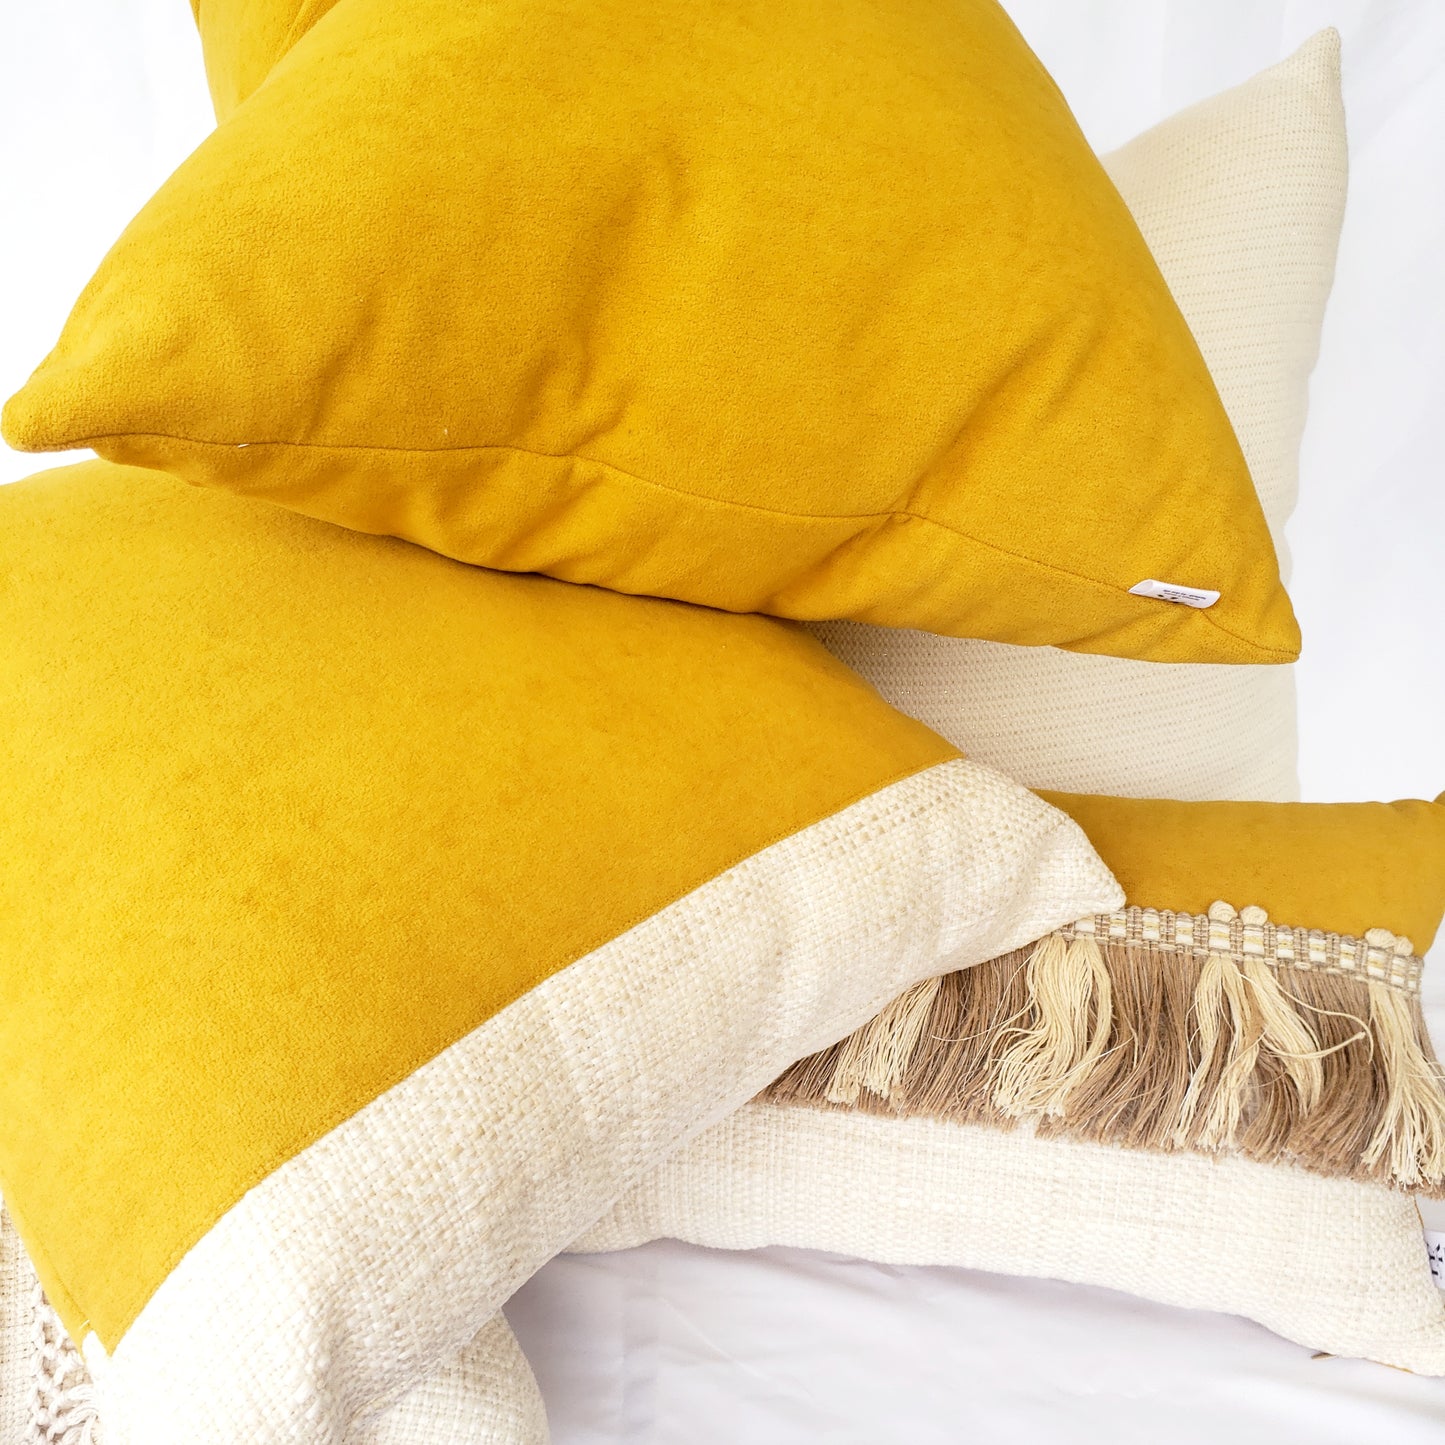 Elevate your home decor with our Fiokim Mustard Deluxe Square Pillow Cover. Crafted with luxurious mustard suede-like fabric, this designer pillow features a sophisticated woven ivory and beige design. Perfect for your sofa or bedroom, its matching reverse and double stitched, sealed edges add a touch of elegance. The invisible zipper ensures a seamless and polished look.
Mustard yellow square pillows